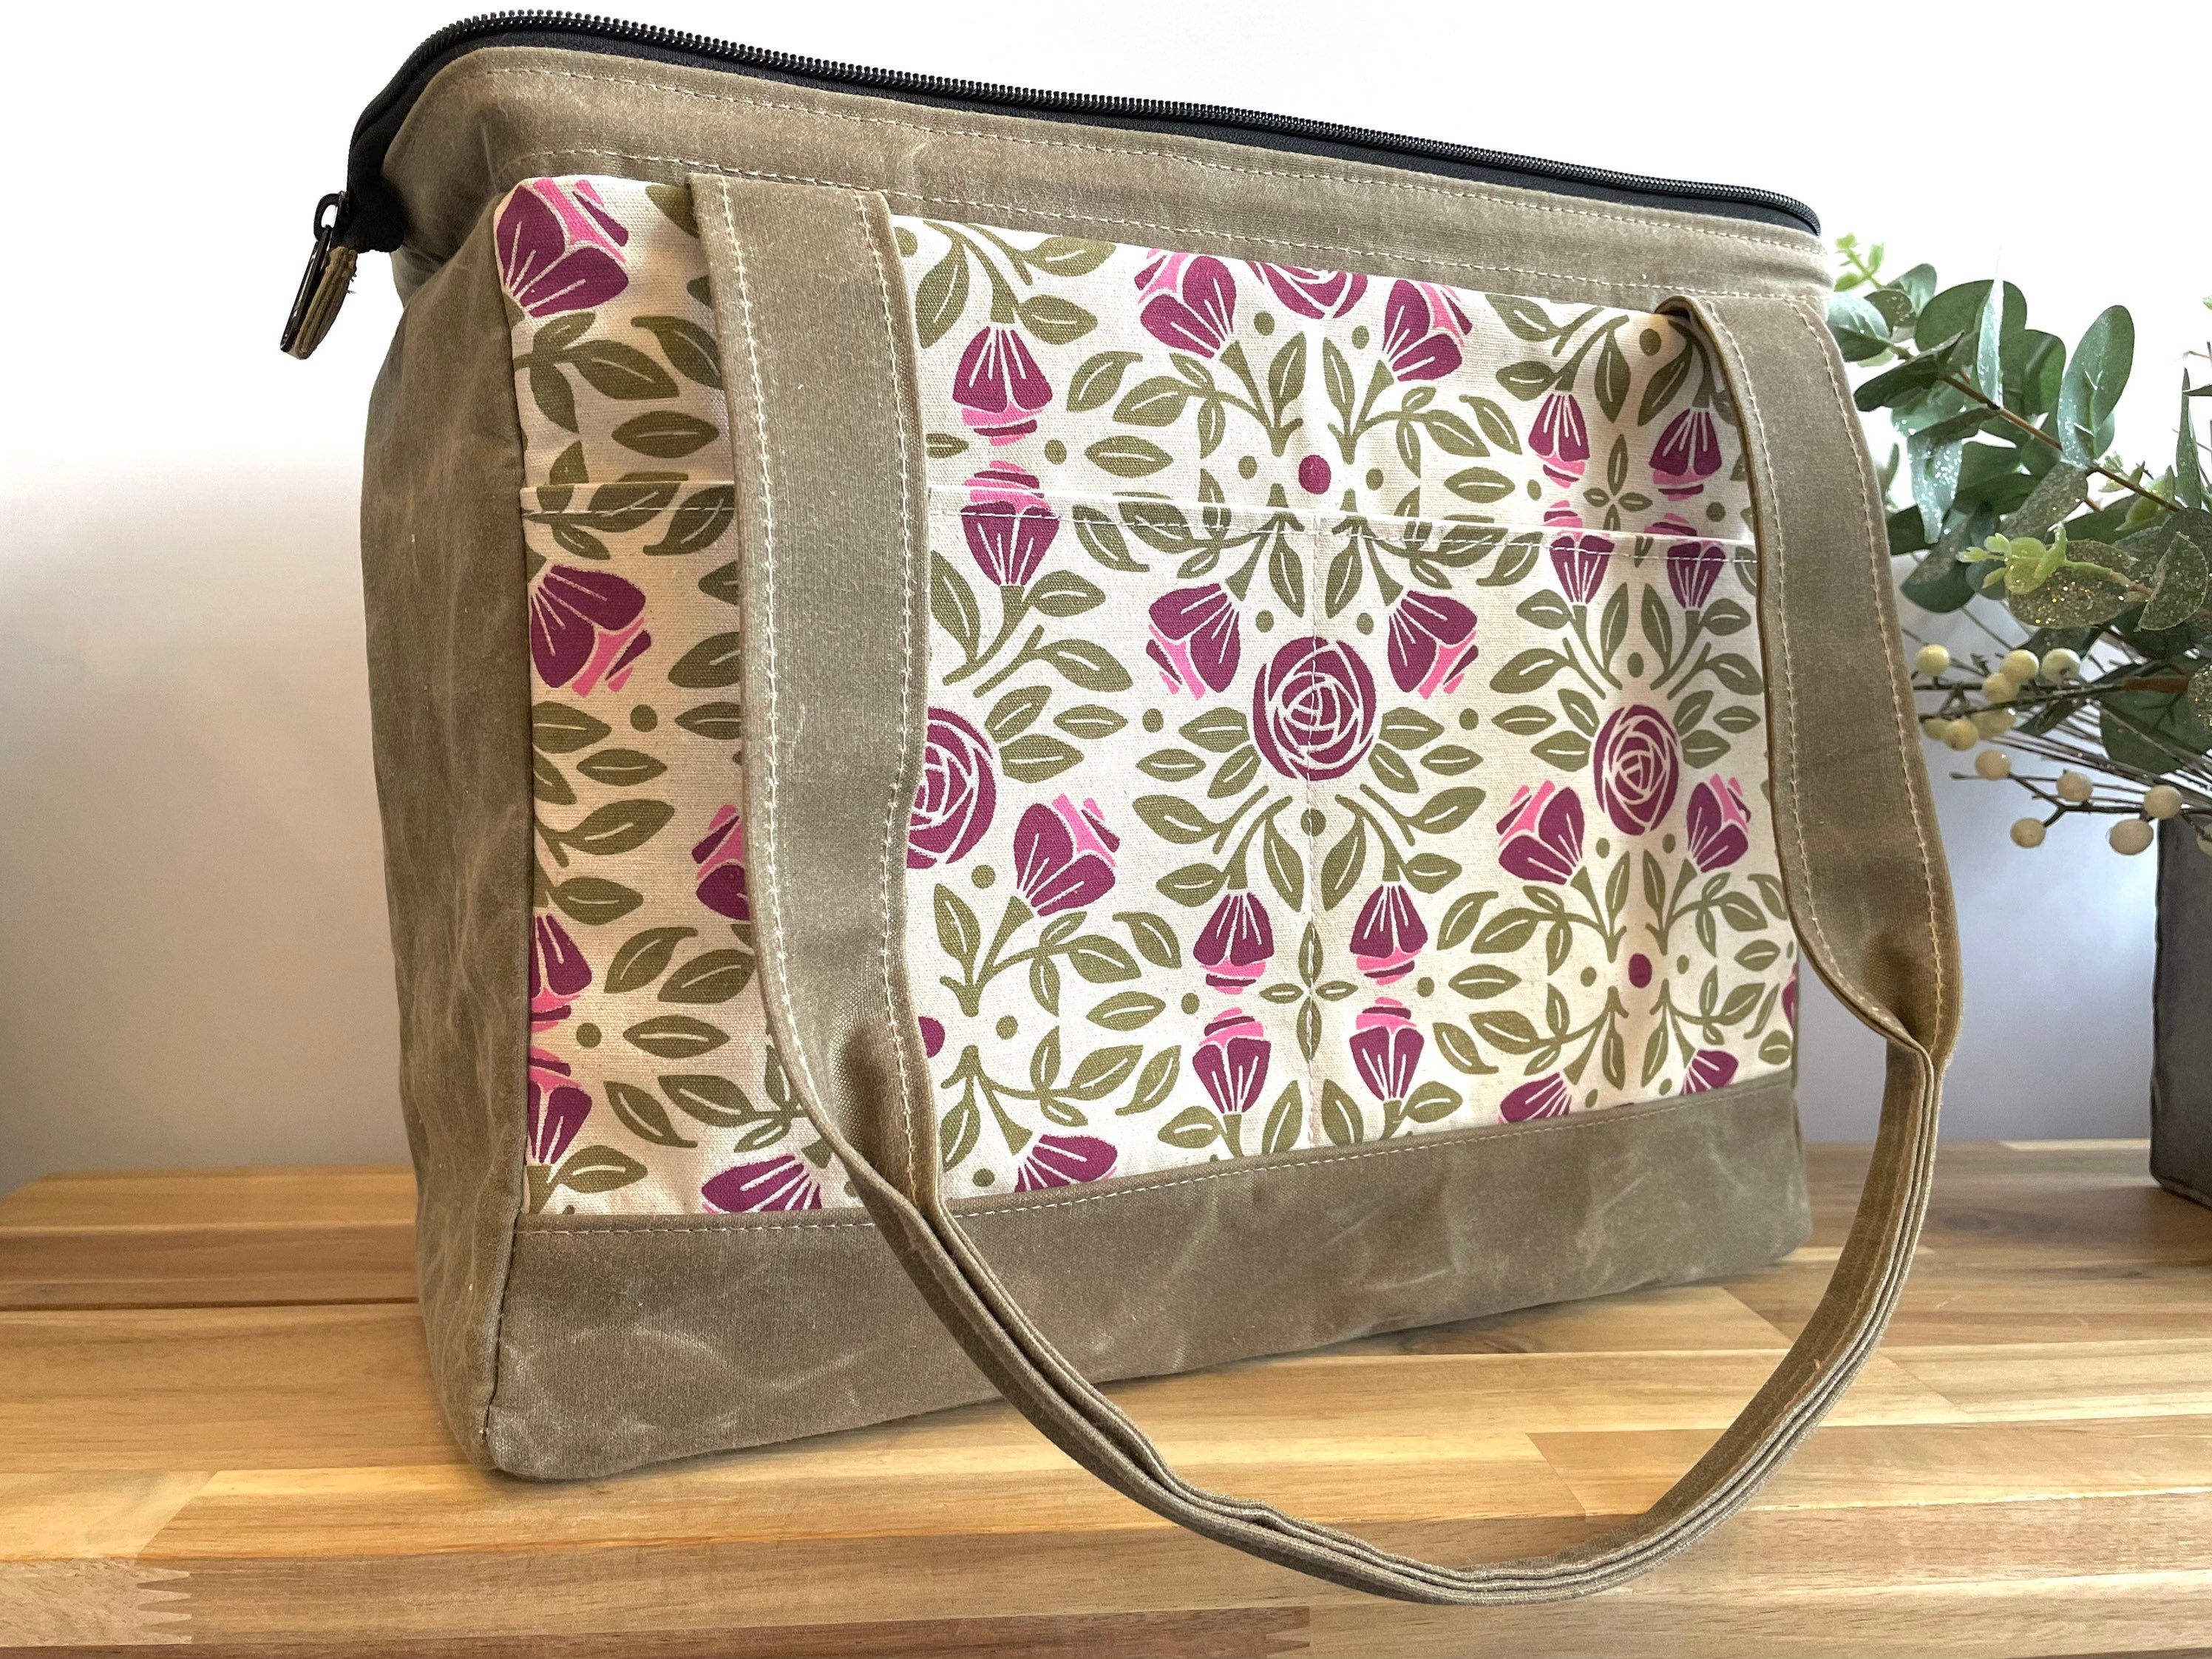 Project Bags/Tool Bags - Heidi West Designs